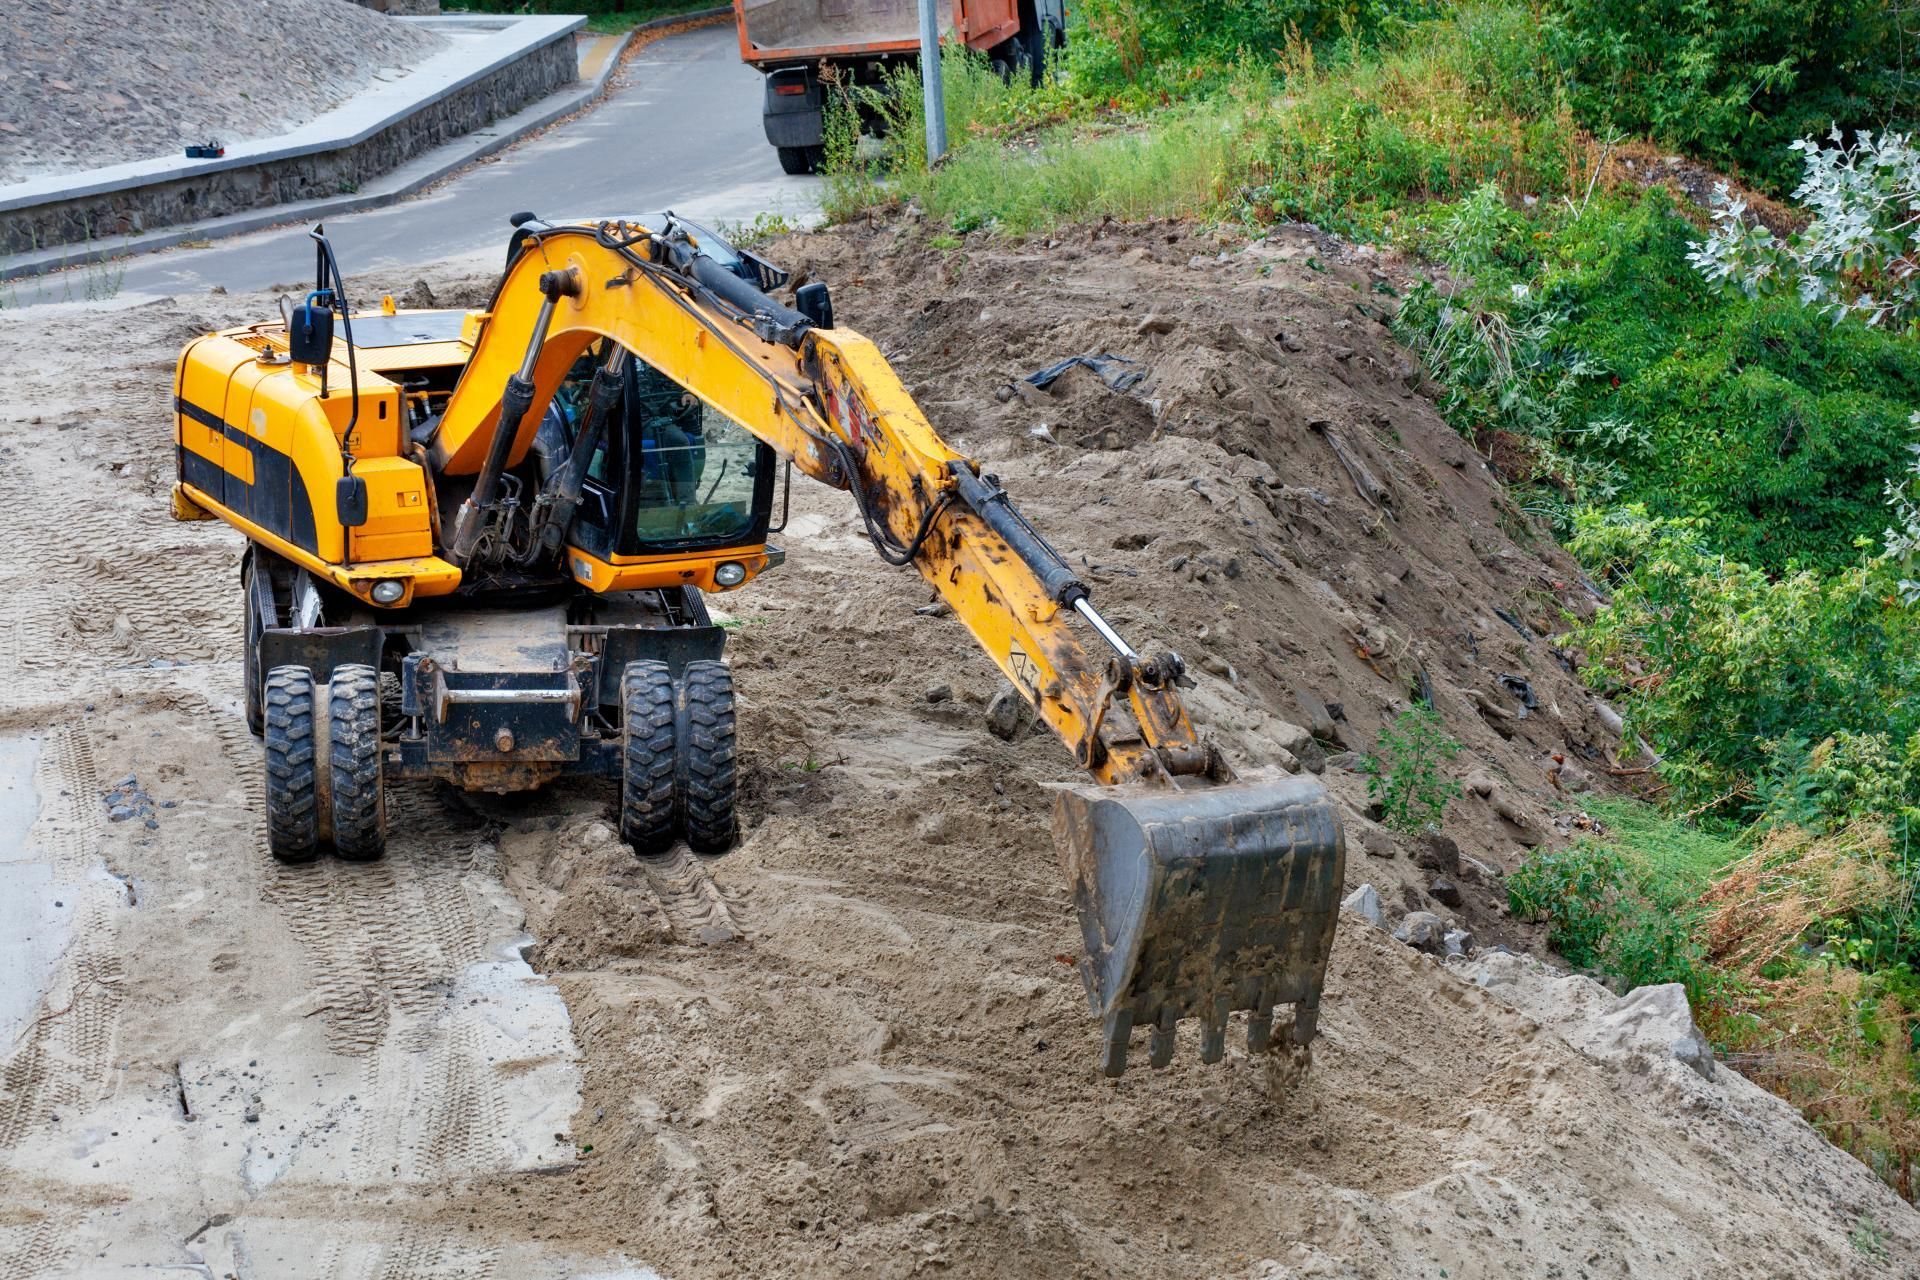 A yellow excavator is moving dirt on a construction site.